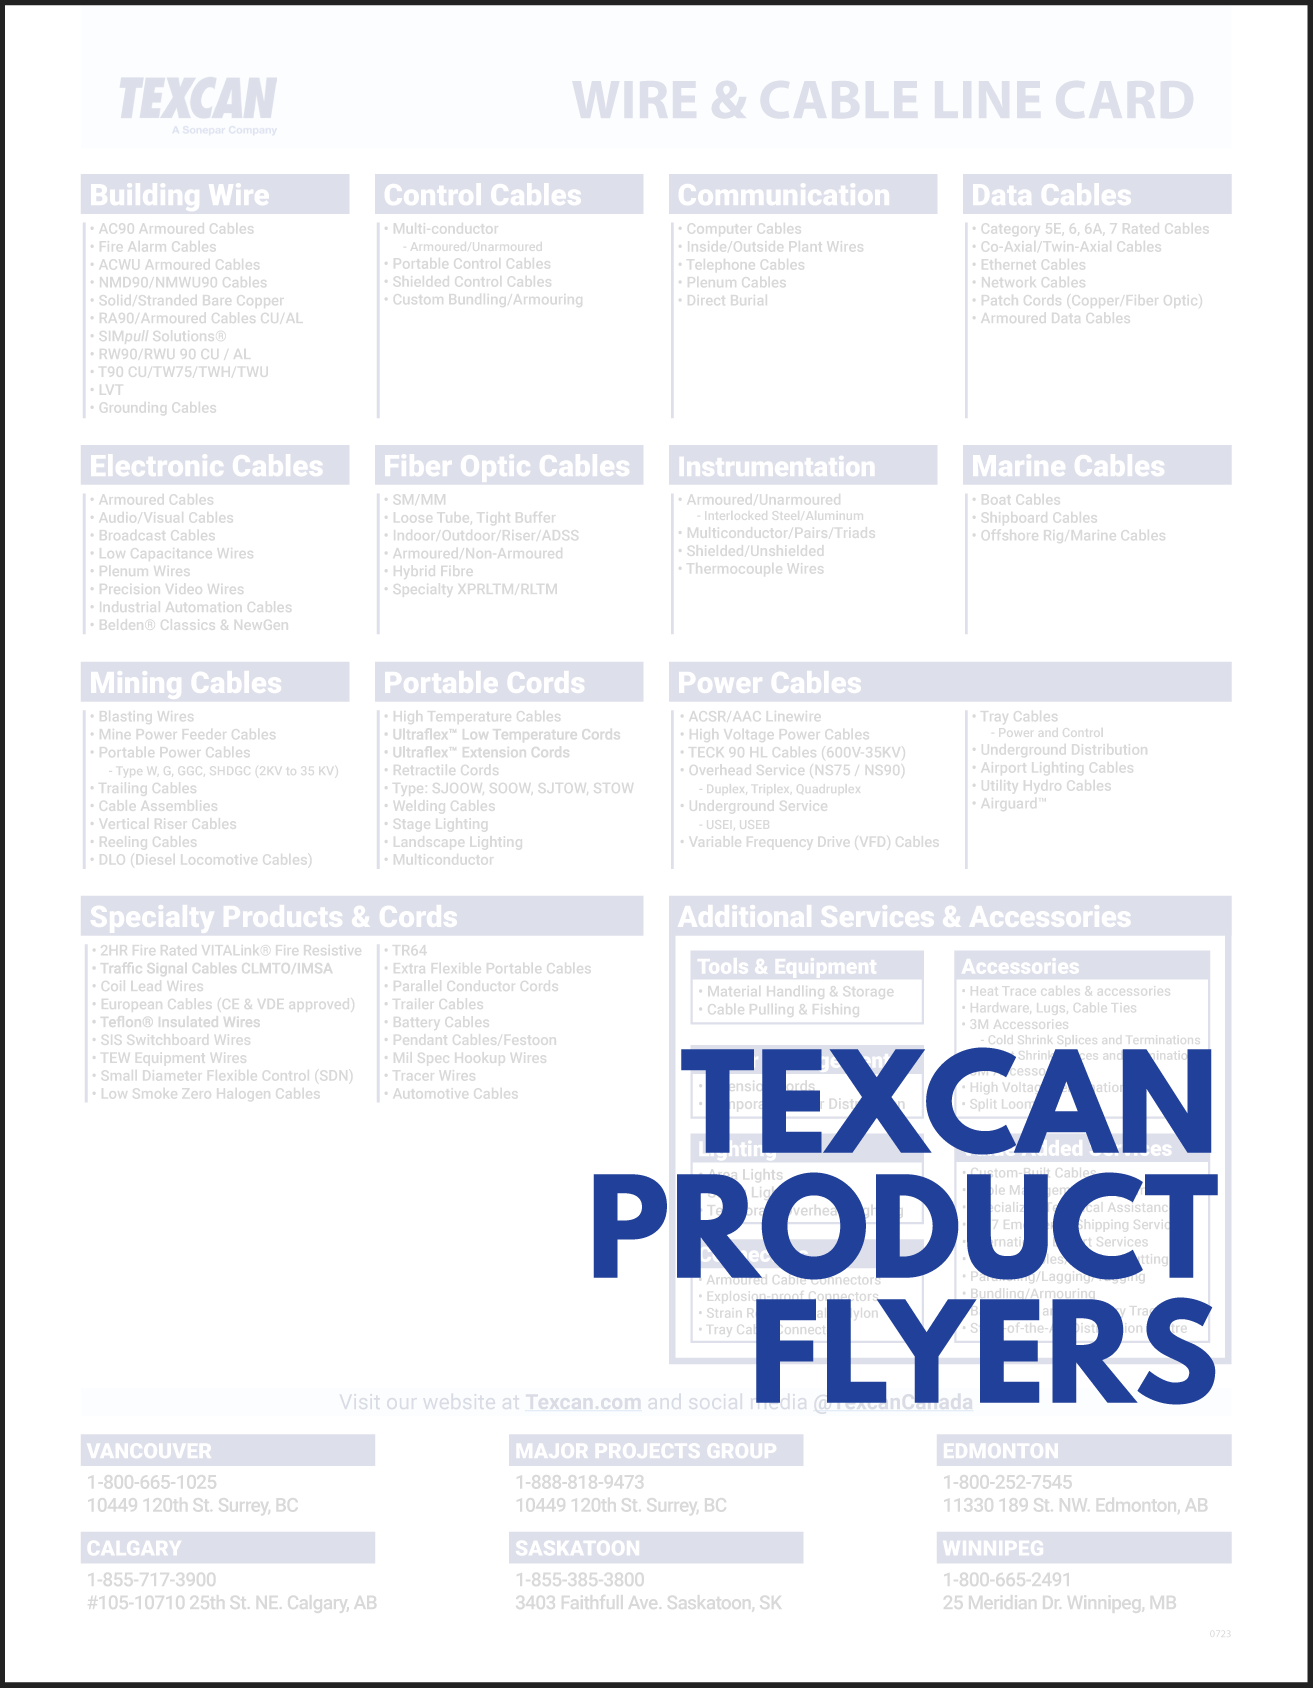 Texcan - Texcan Product Flyers